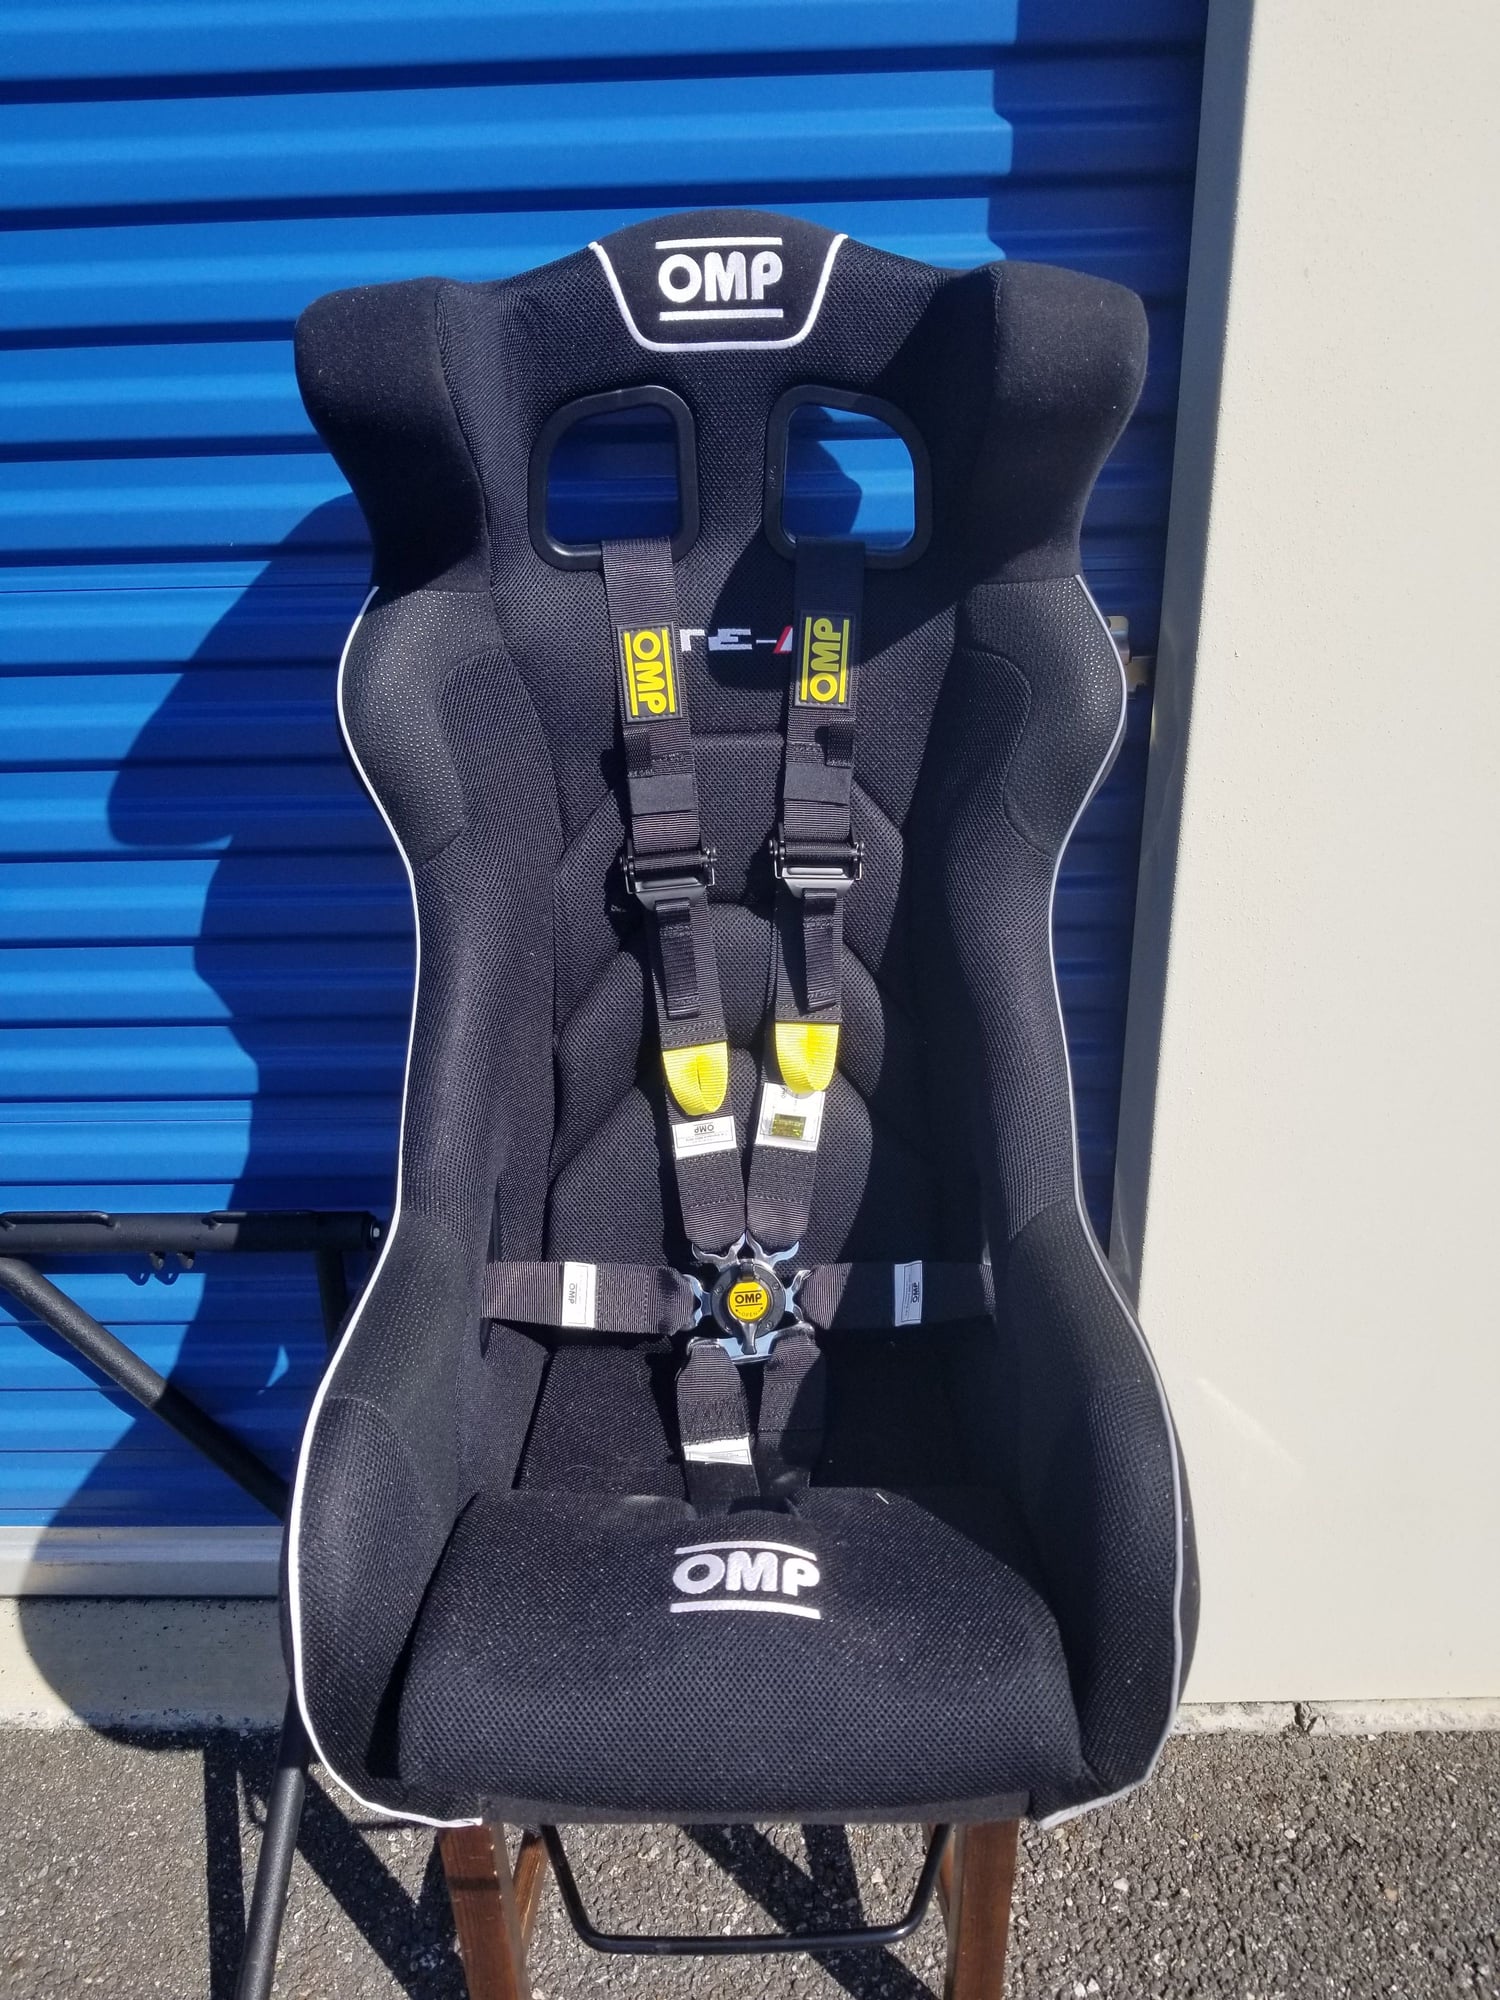 Interior/Upholstery - Brand New OMP HTE-R containment racing seat + OMP CHAMP-R - New - 1999 to 2020 Porsche 911 - 2006 to 2016 Porsche Cayman - Chesapeake, VA 23321, United States